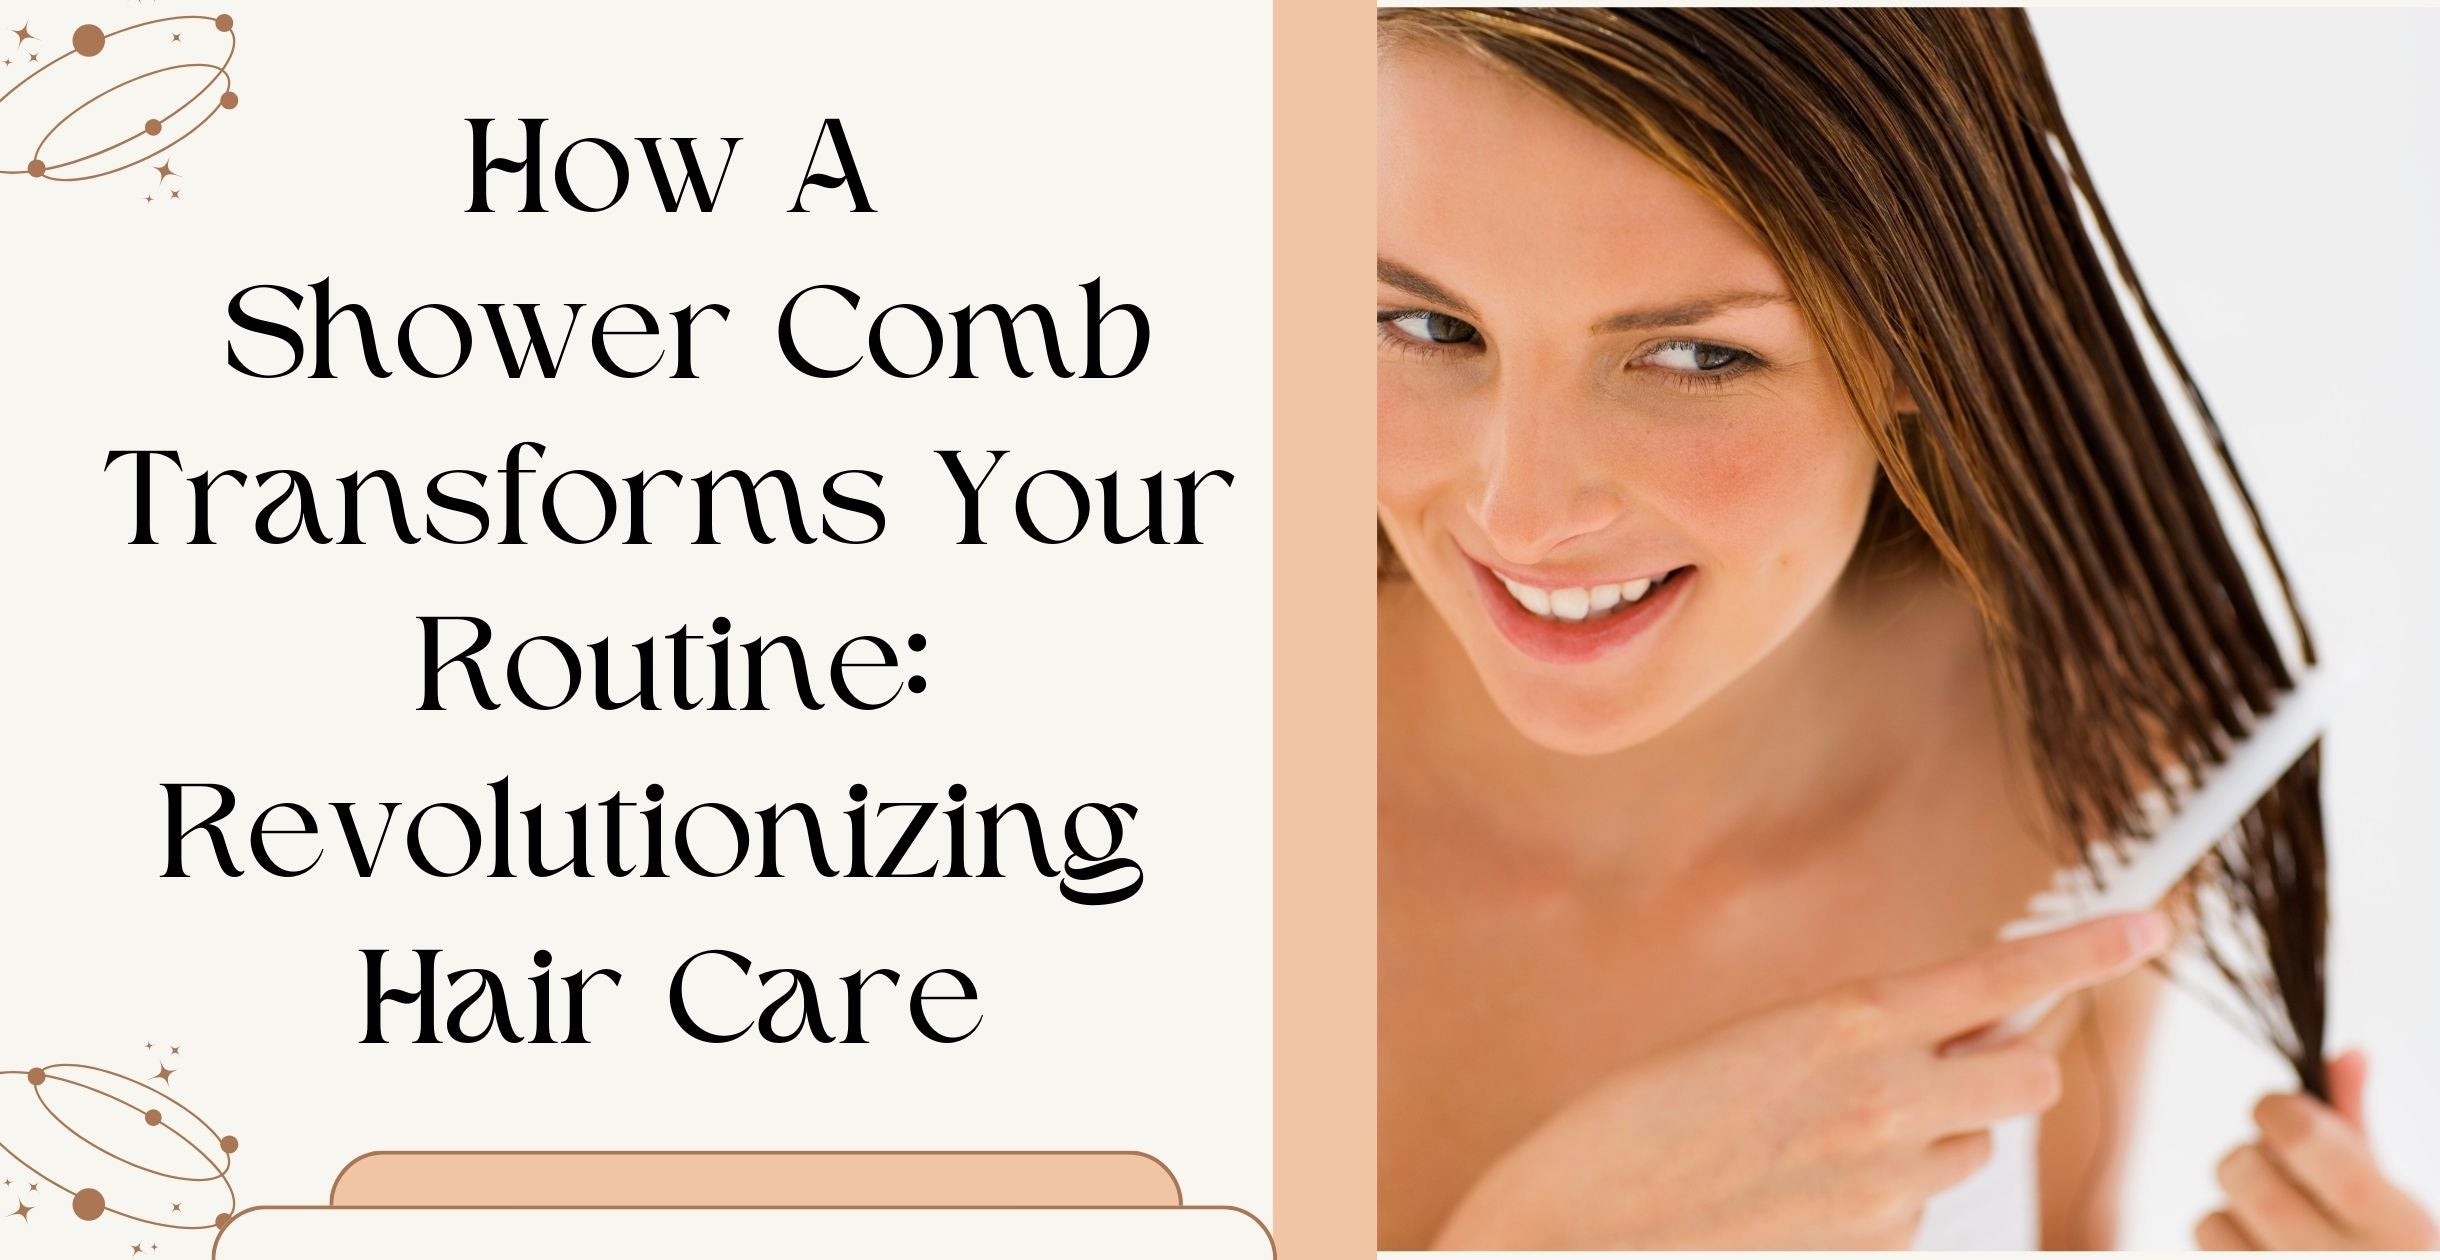 How A Shower Comb Transforms Your Routine :Revolutionizing Hair Care